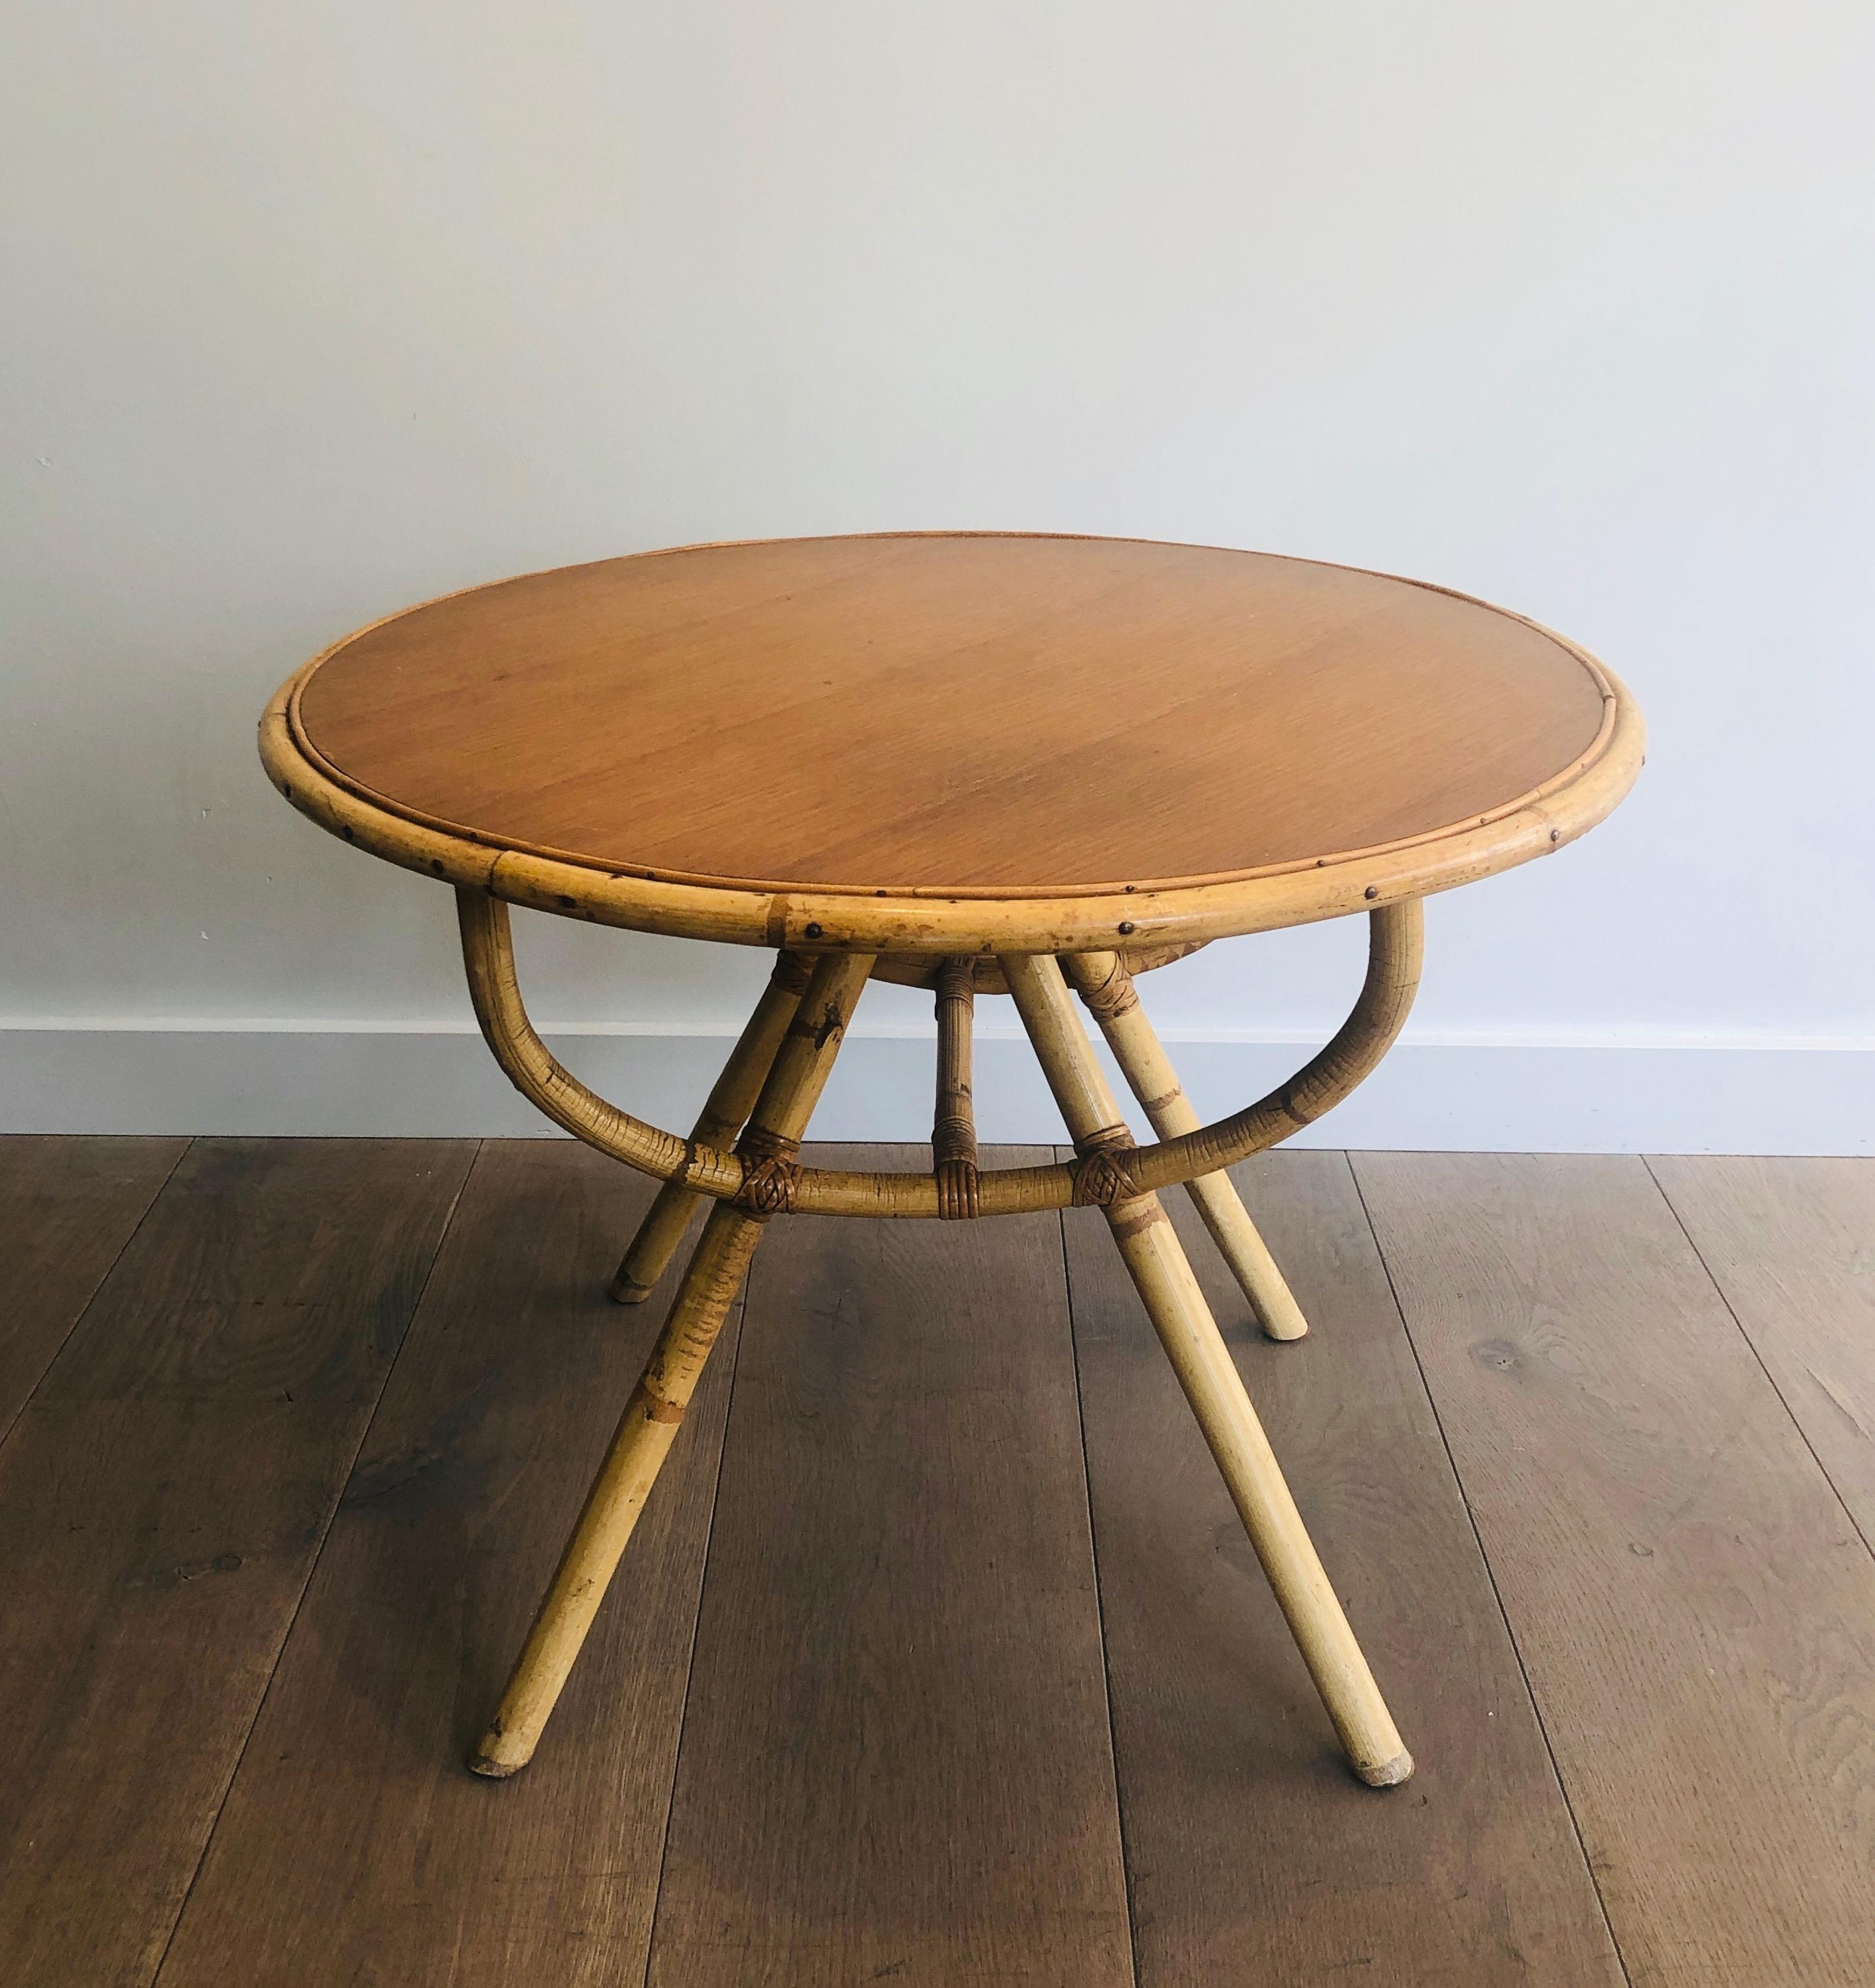 This nice small round coffee table is all made of rattan with a wooden top. This is French work, circa 1970.